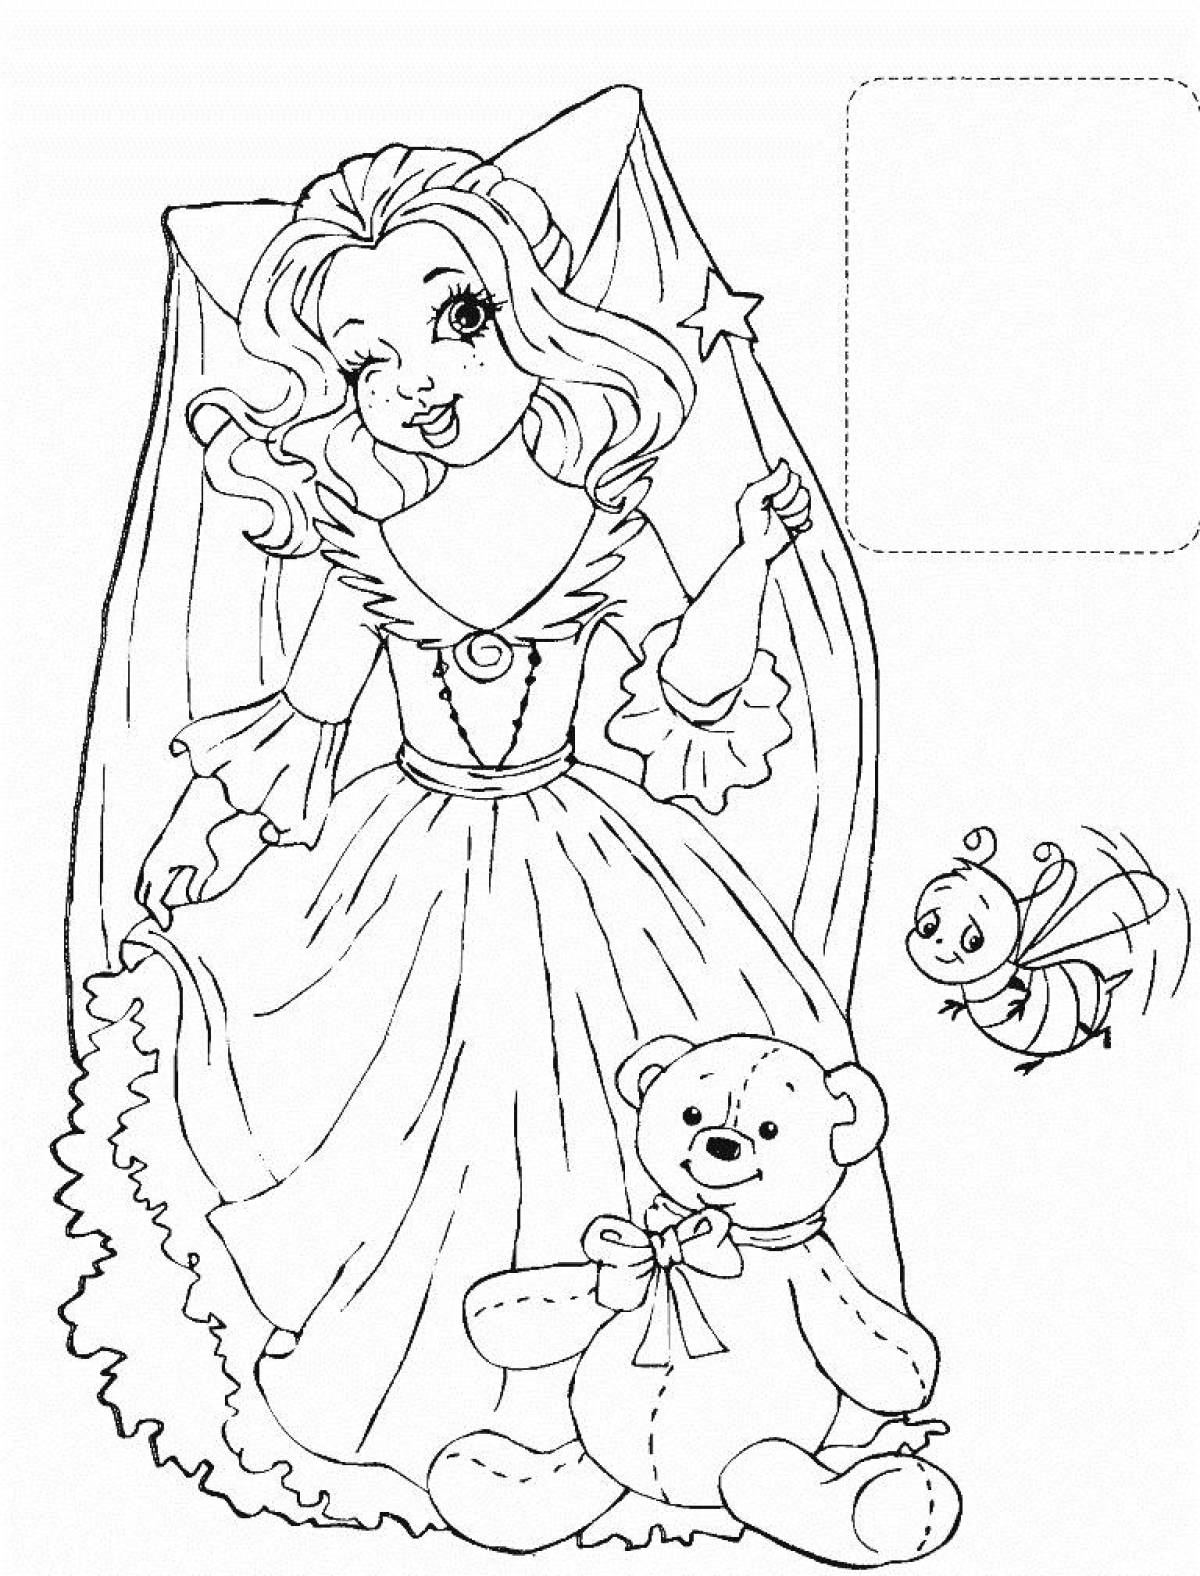 Glitter coloring book for children 6-7 years old princess